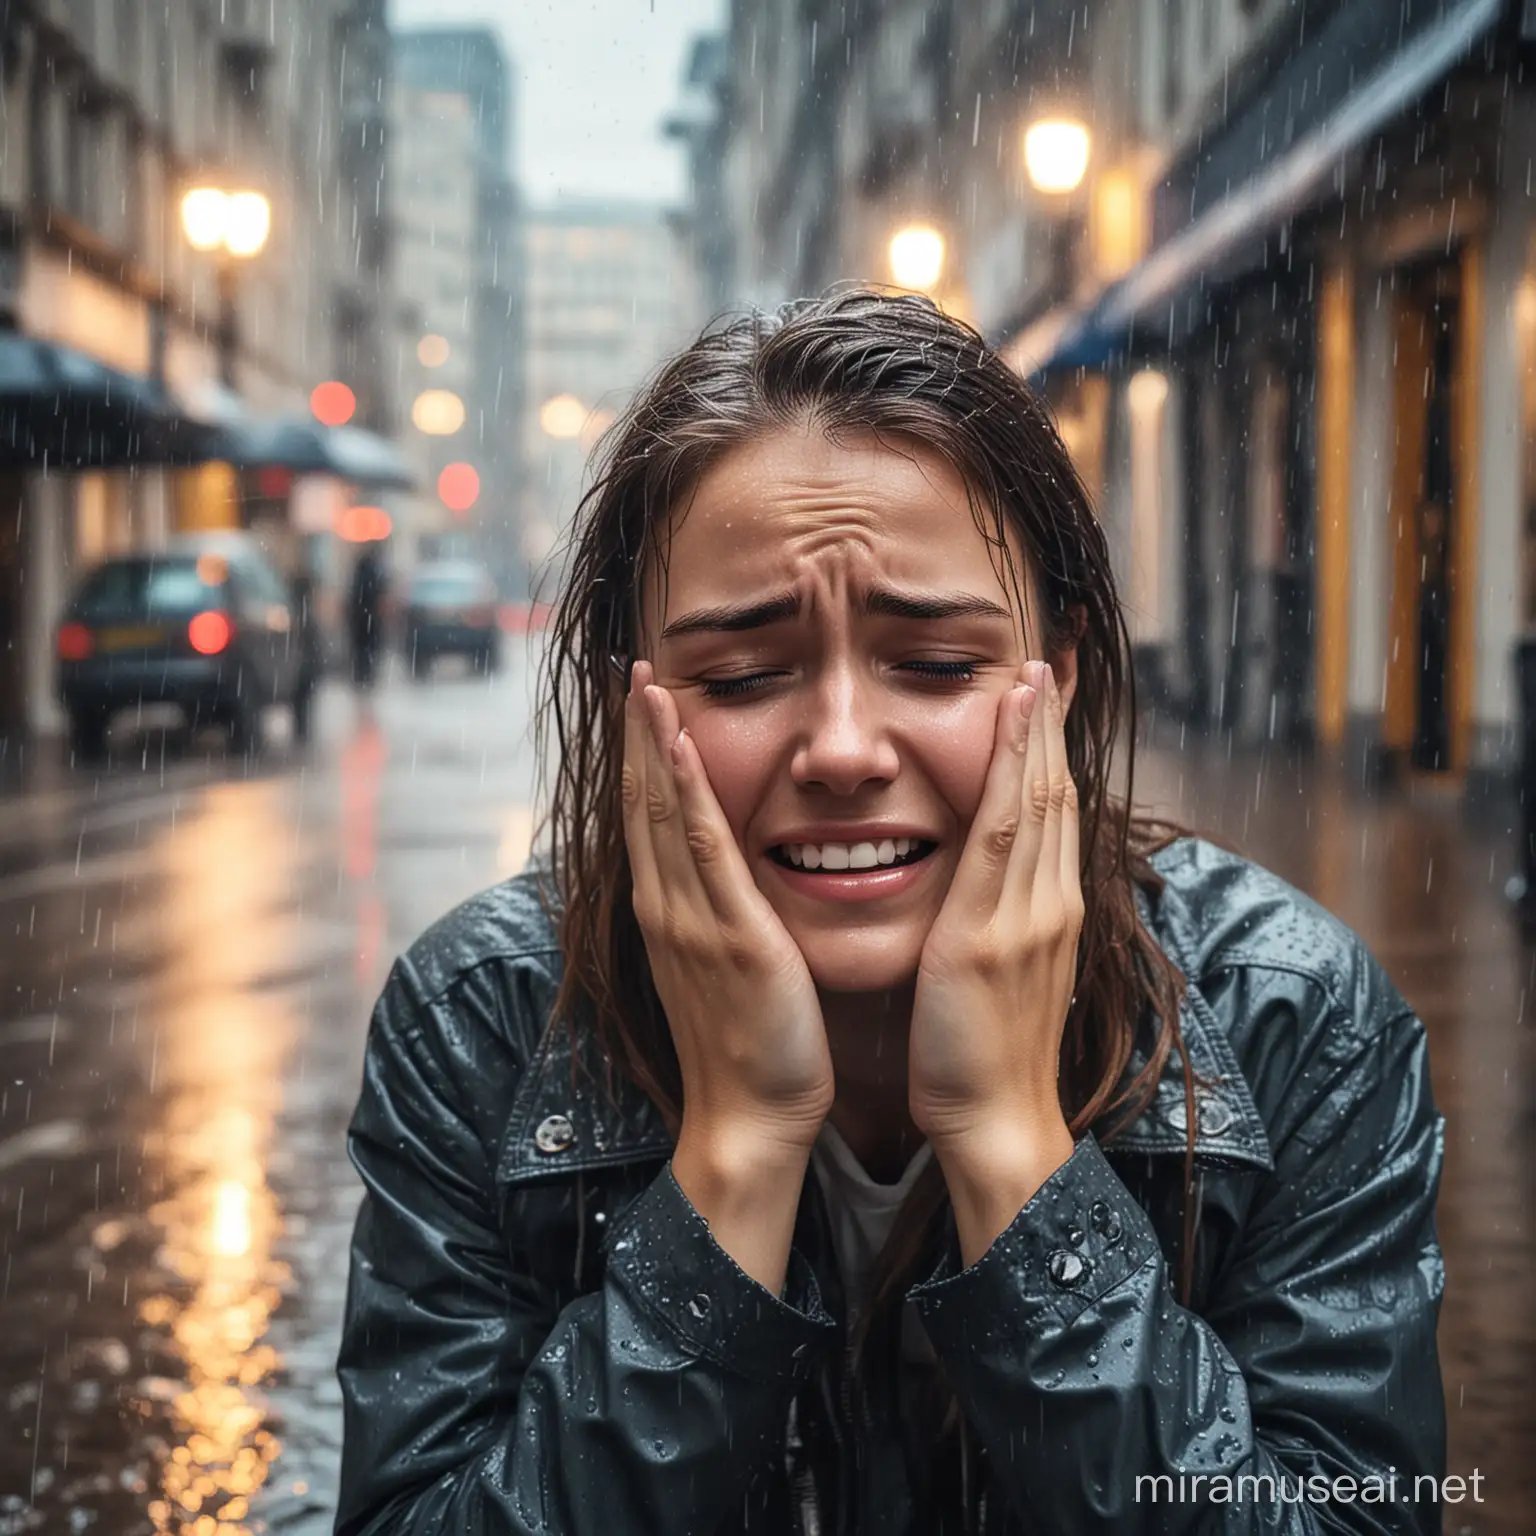 Young woman crying under the rain in a city